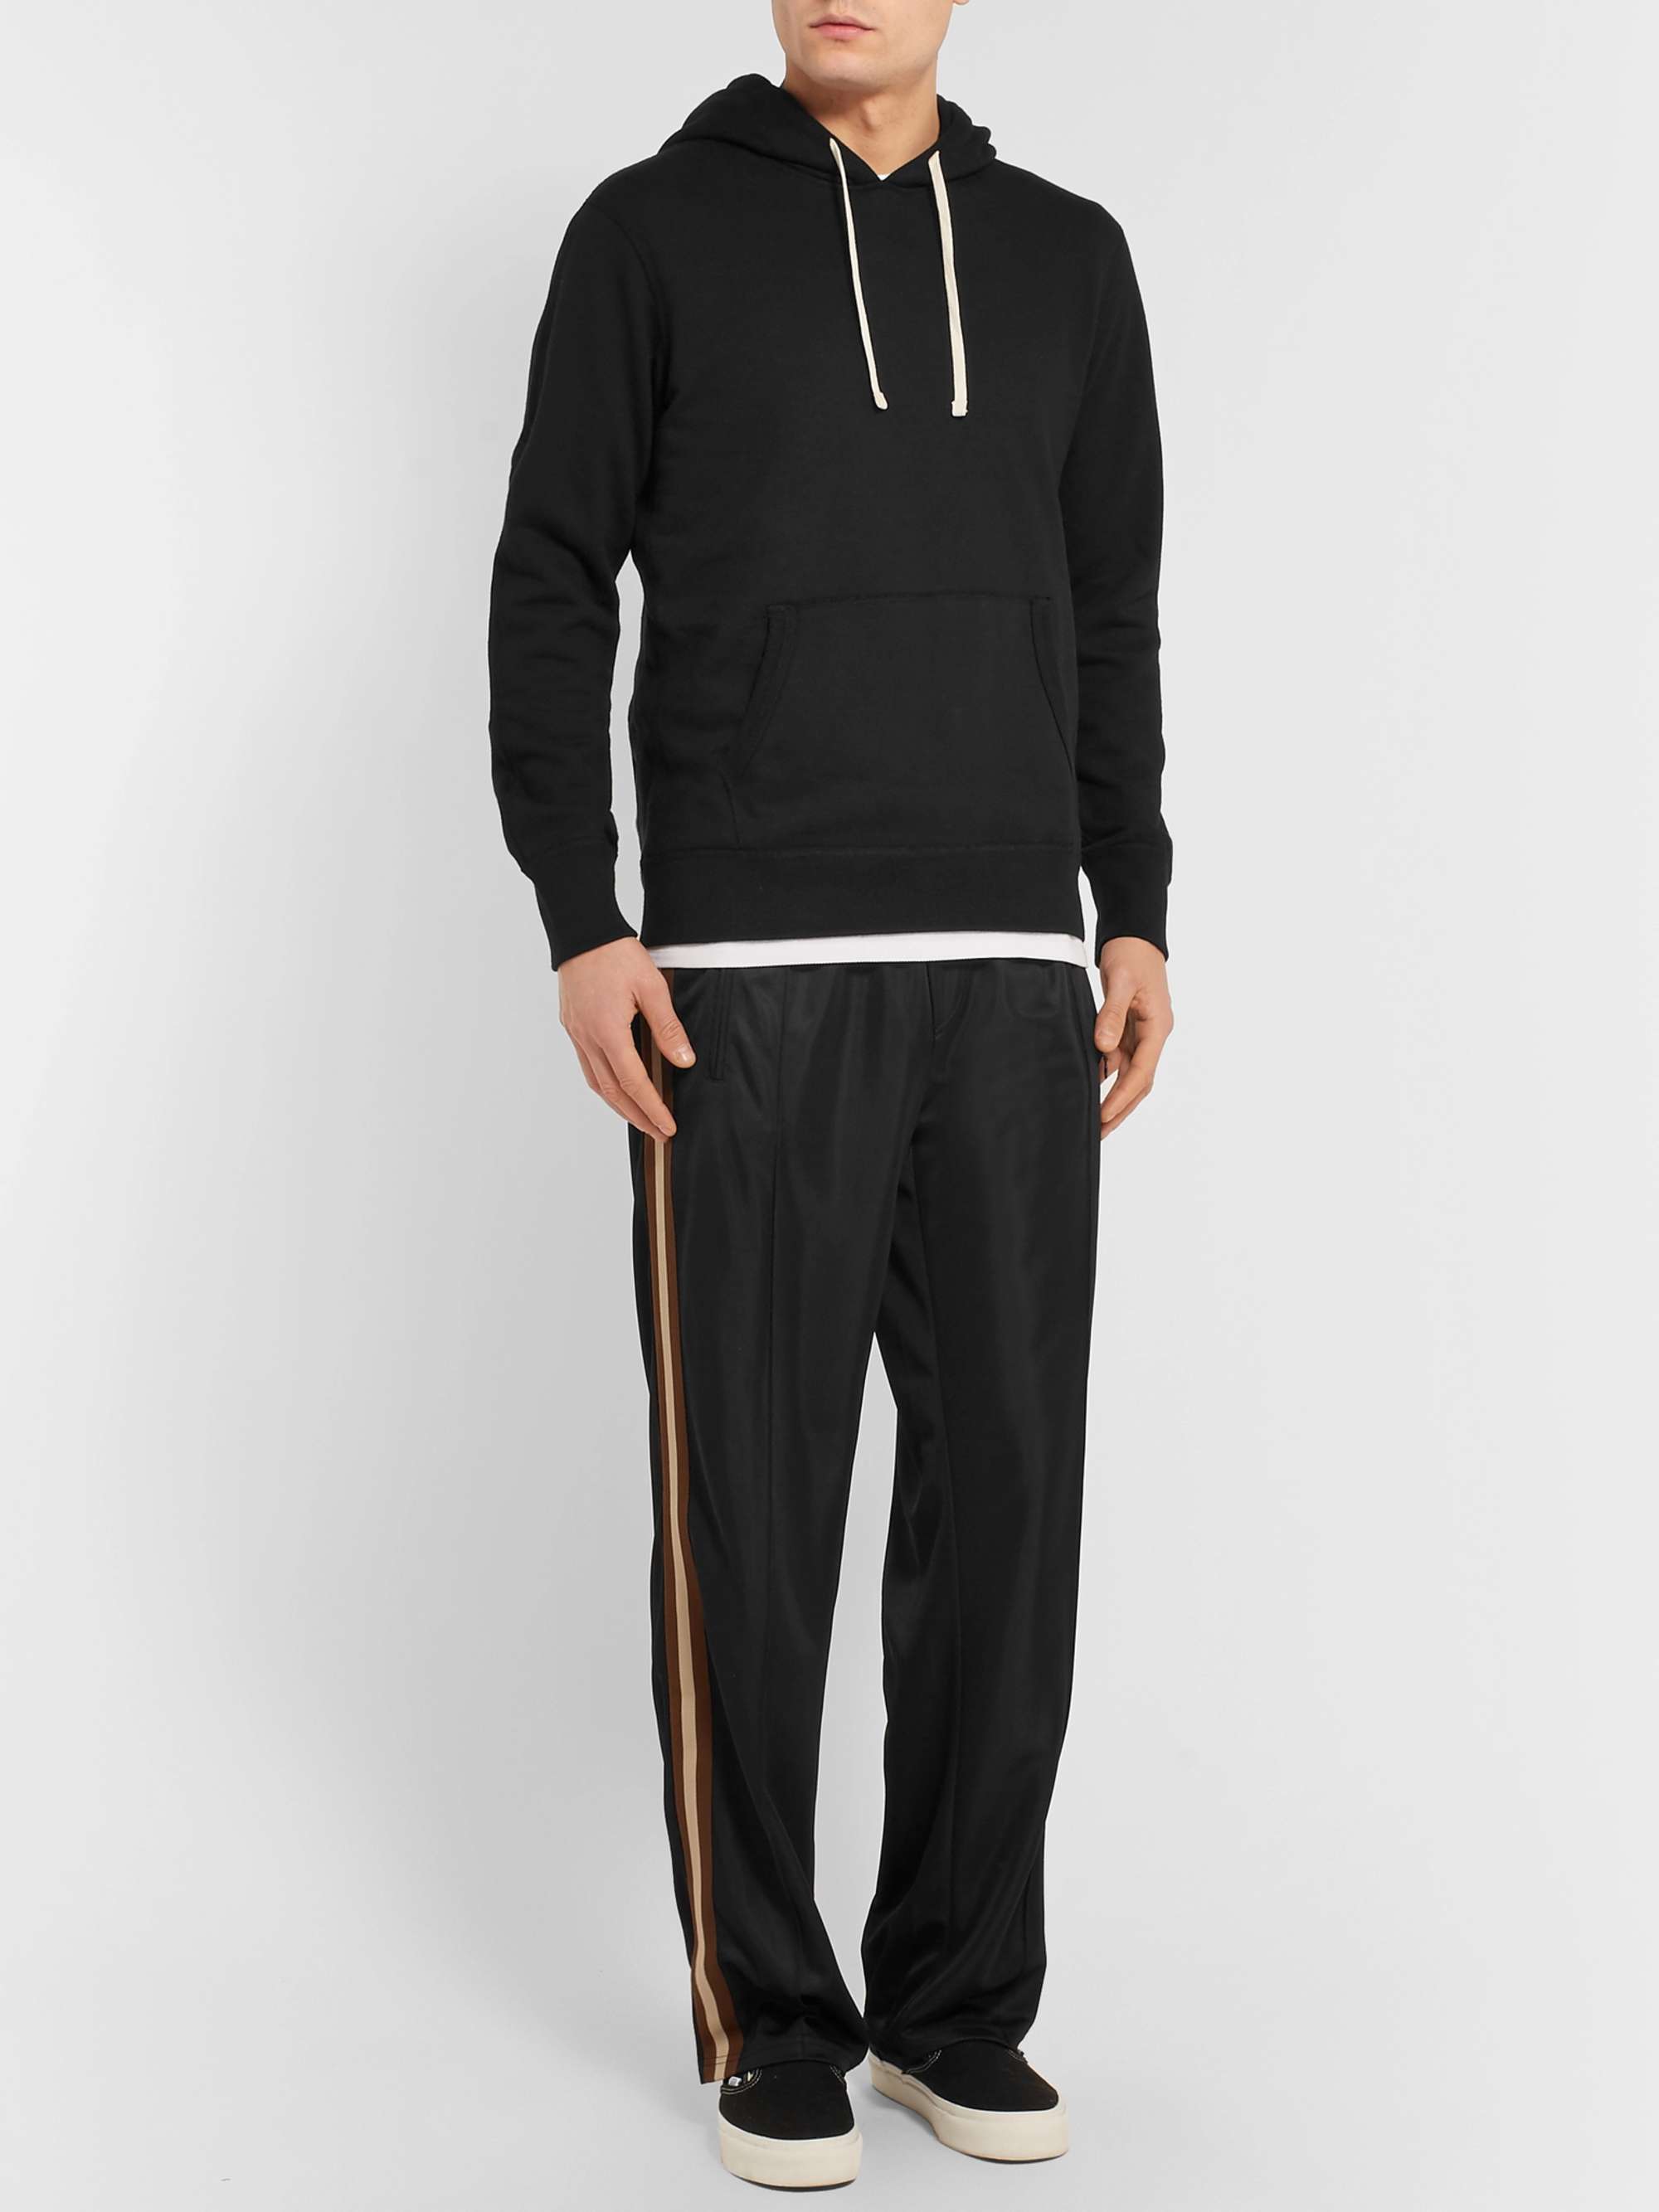 REIGNING CHAMP Loopback Cotton-Jersey Hoodie for Men | MR PORTER